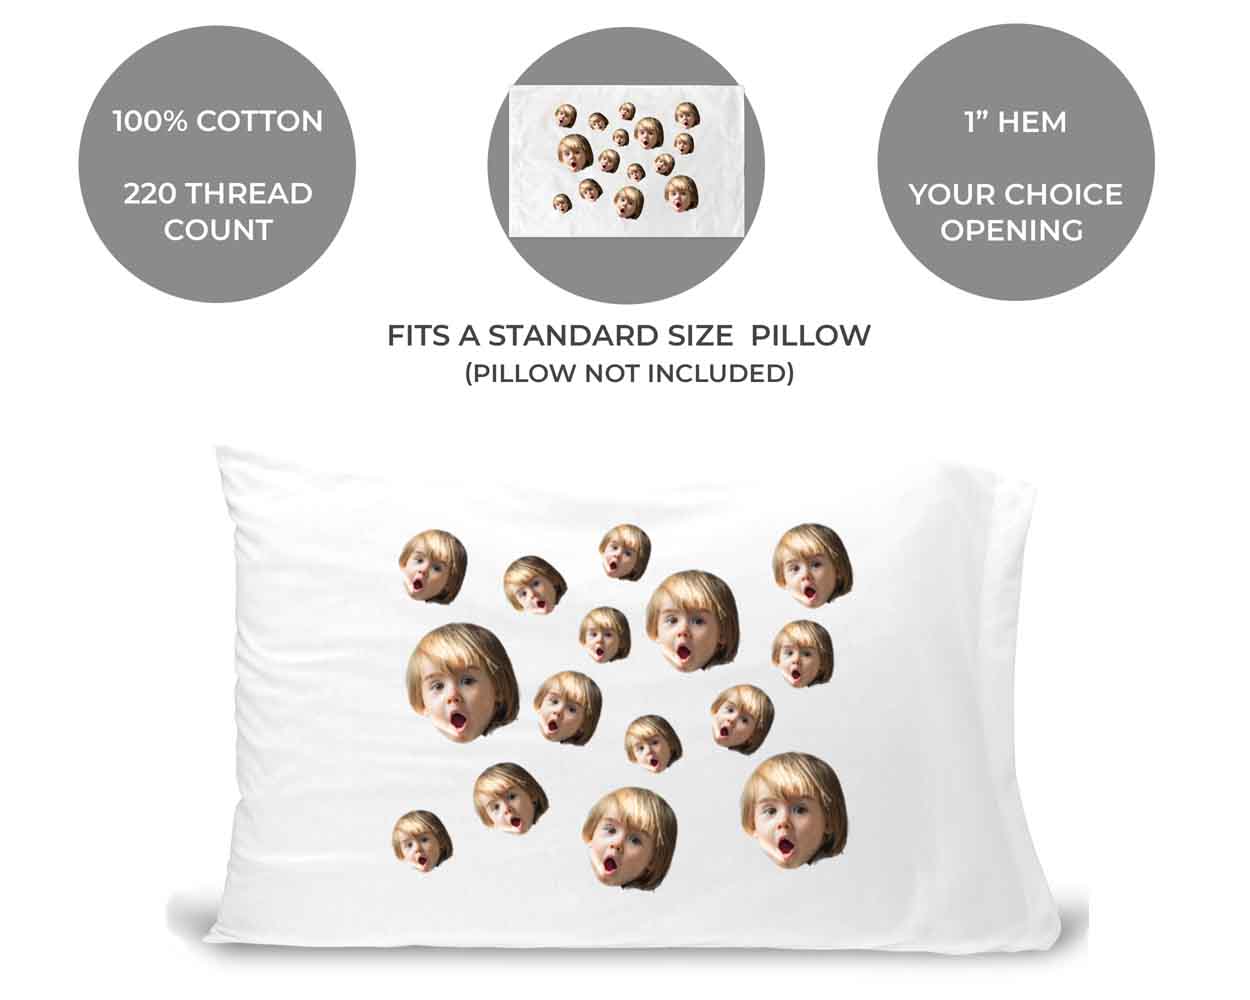 Fun standard pillowcase custom printed with photo face cropped in all over design make a fun gift for anyone.